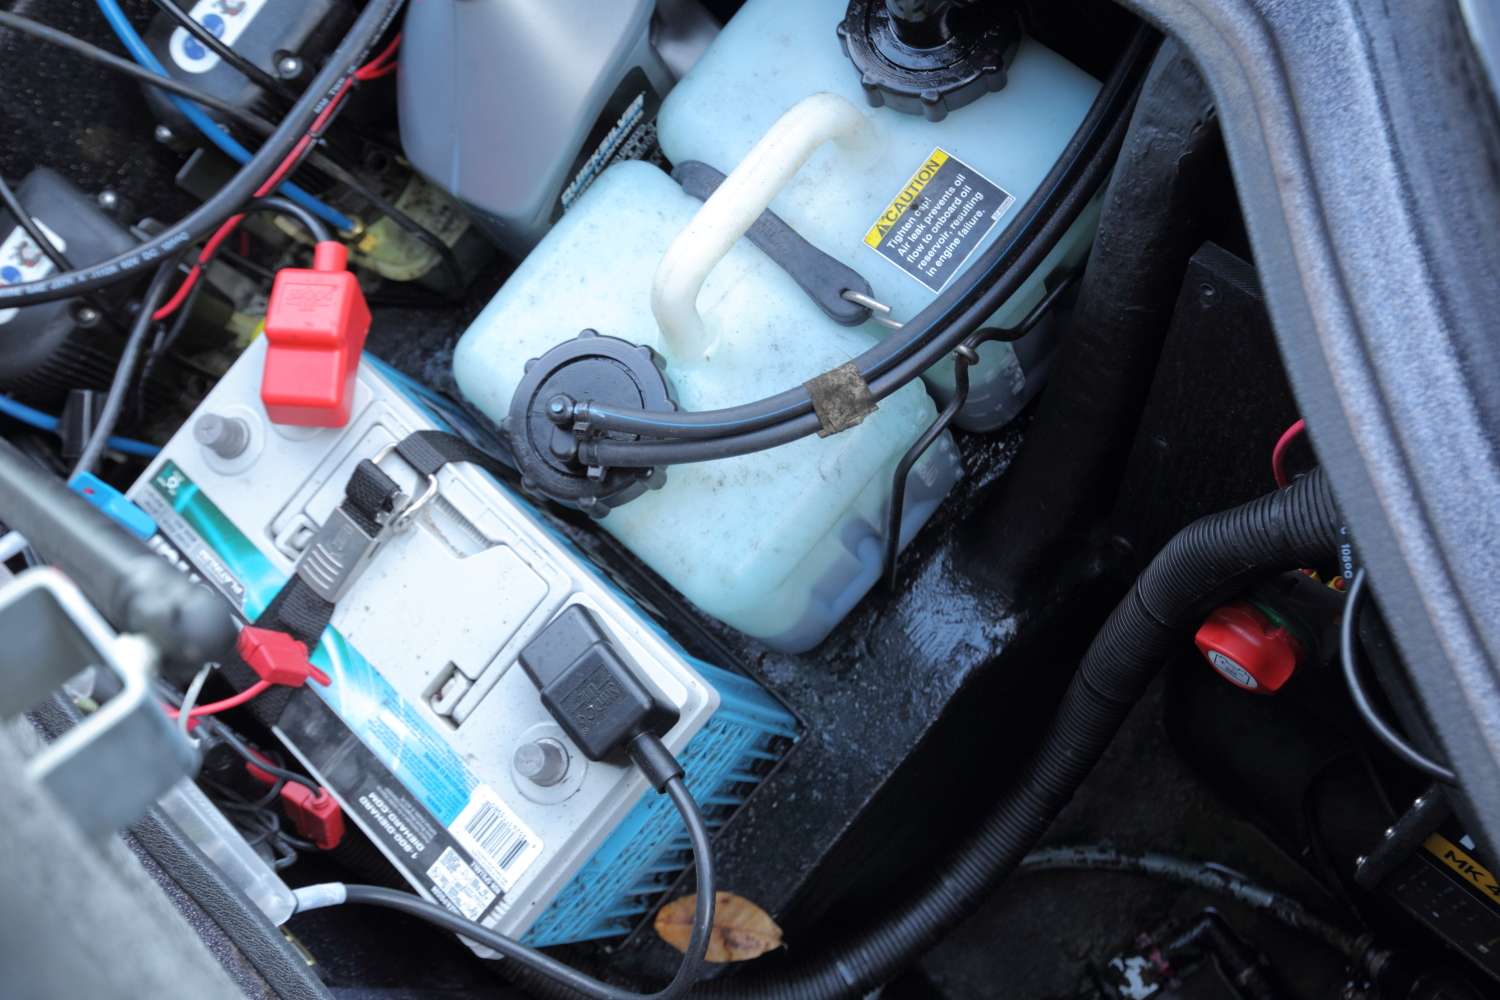 The rear of the boat has four DieHard Platinum AGM batteries and an extra bottle of oil.